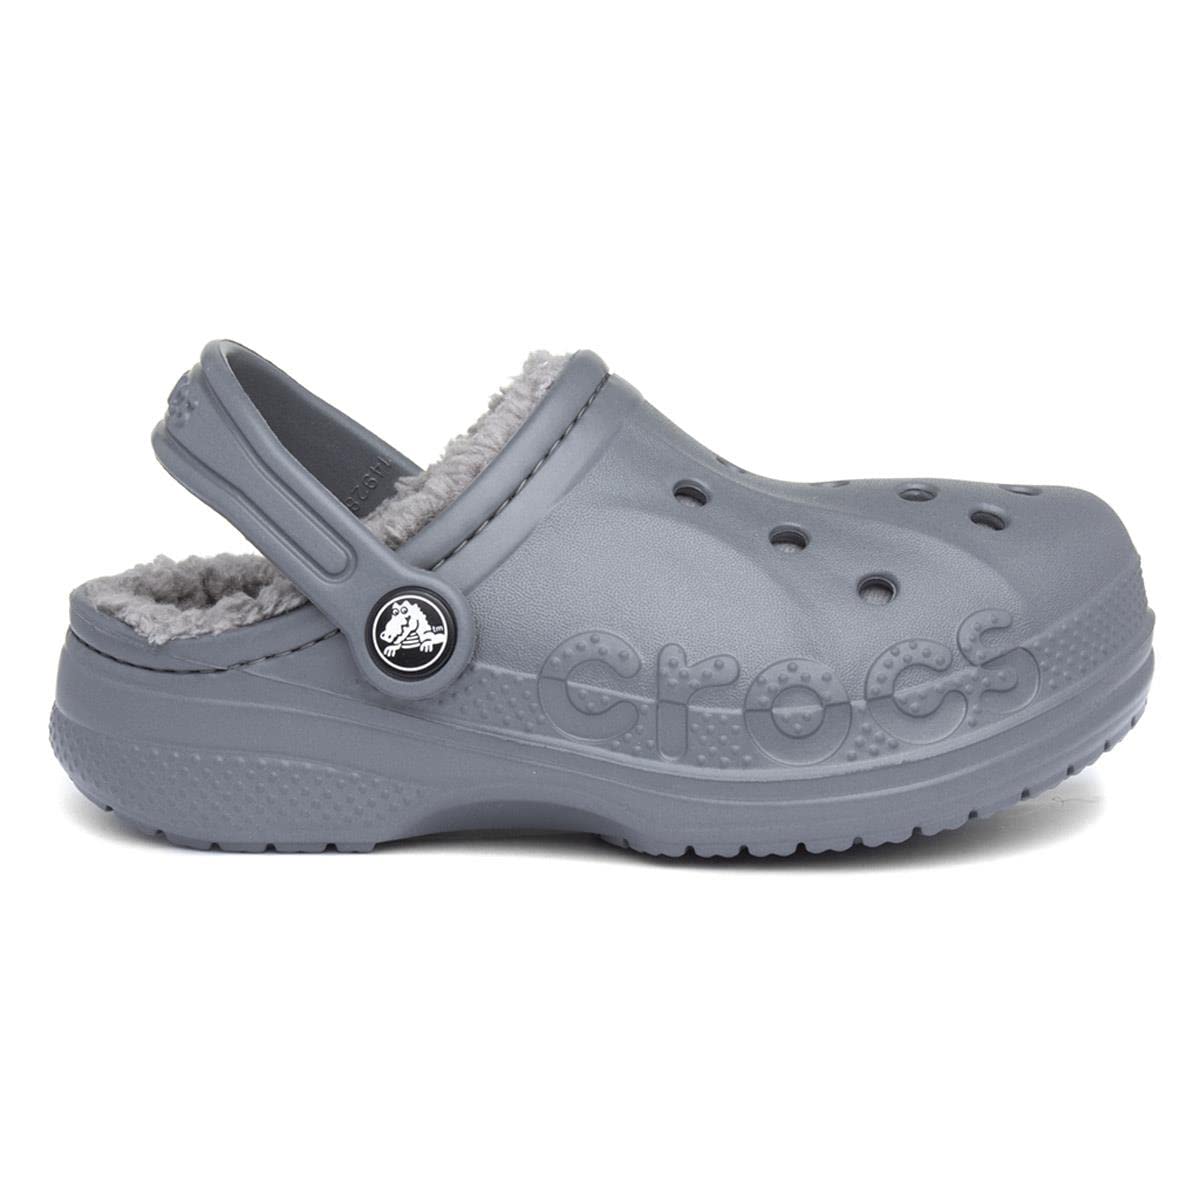 Crocs Unisex-Child Baya Lined Clogs, Kids and Toddler Slippers